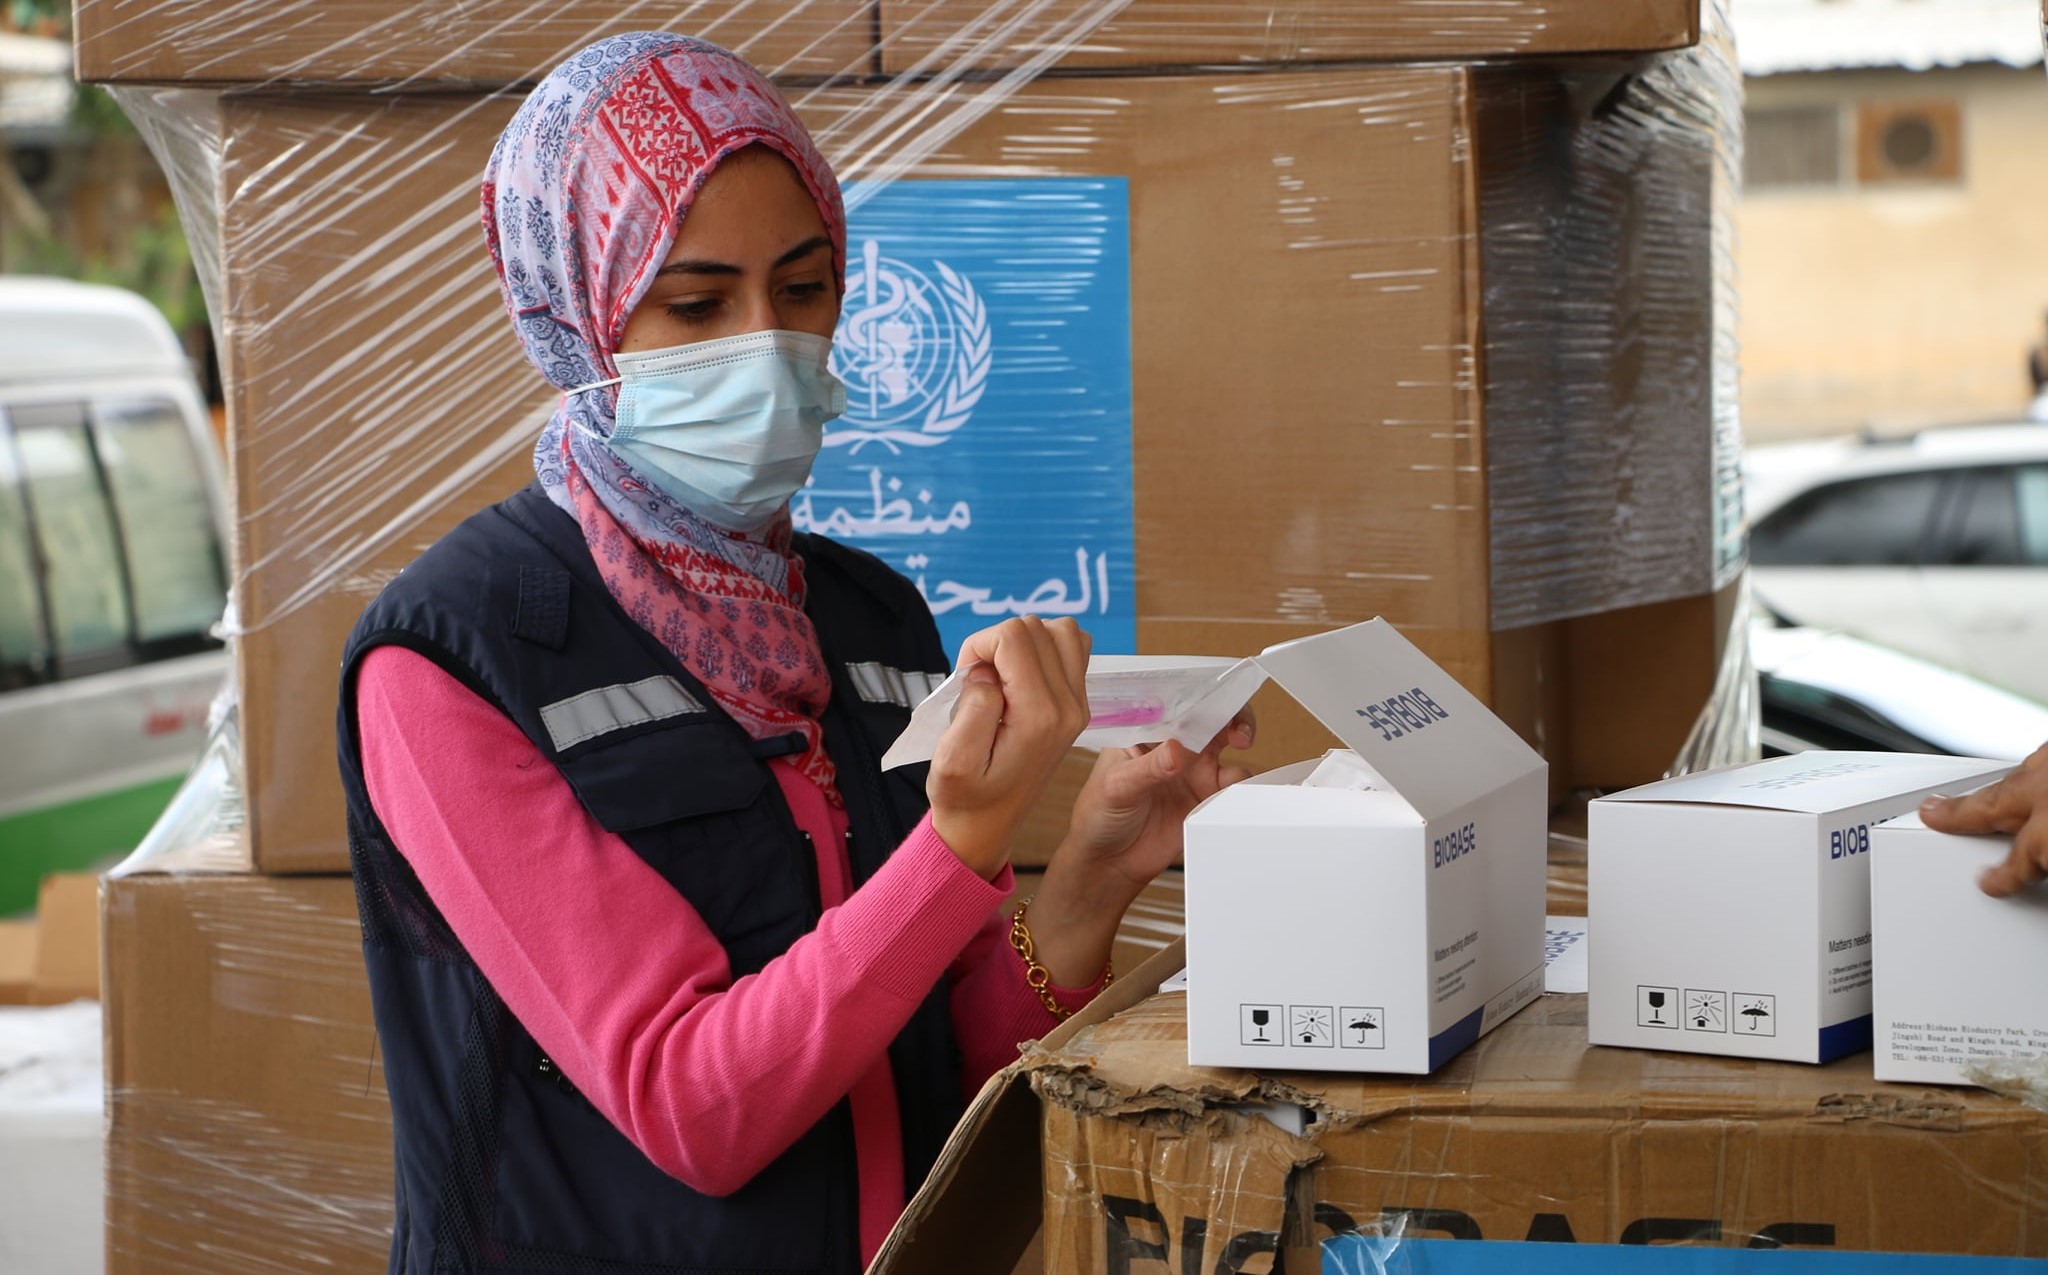 A Palestinian health worker in the West Bank examines medical aid materials provided to the Palestinian people by the UN.